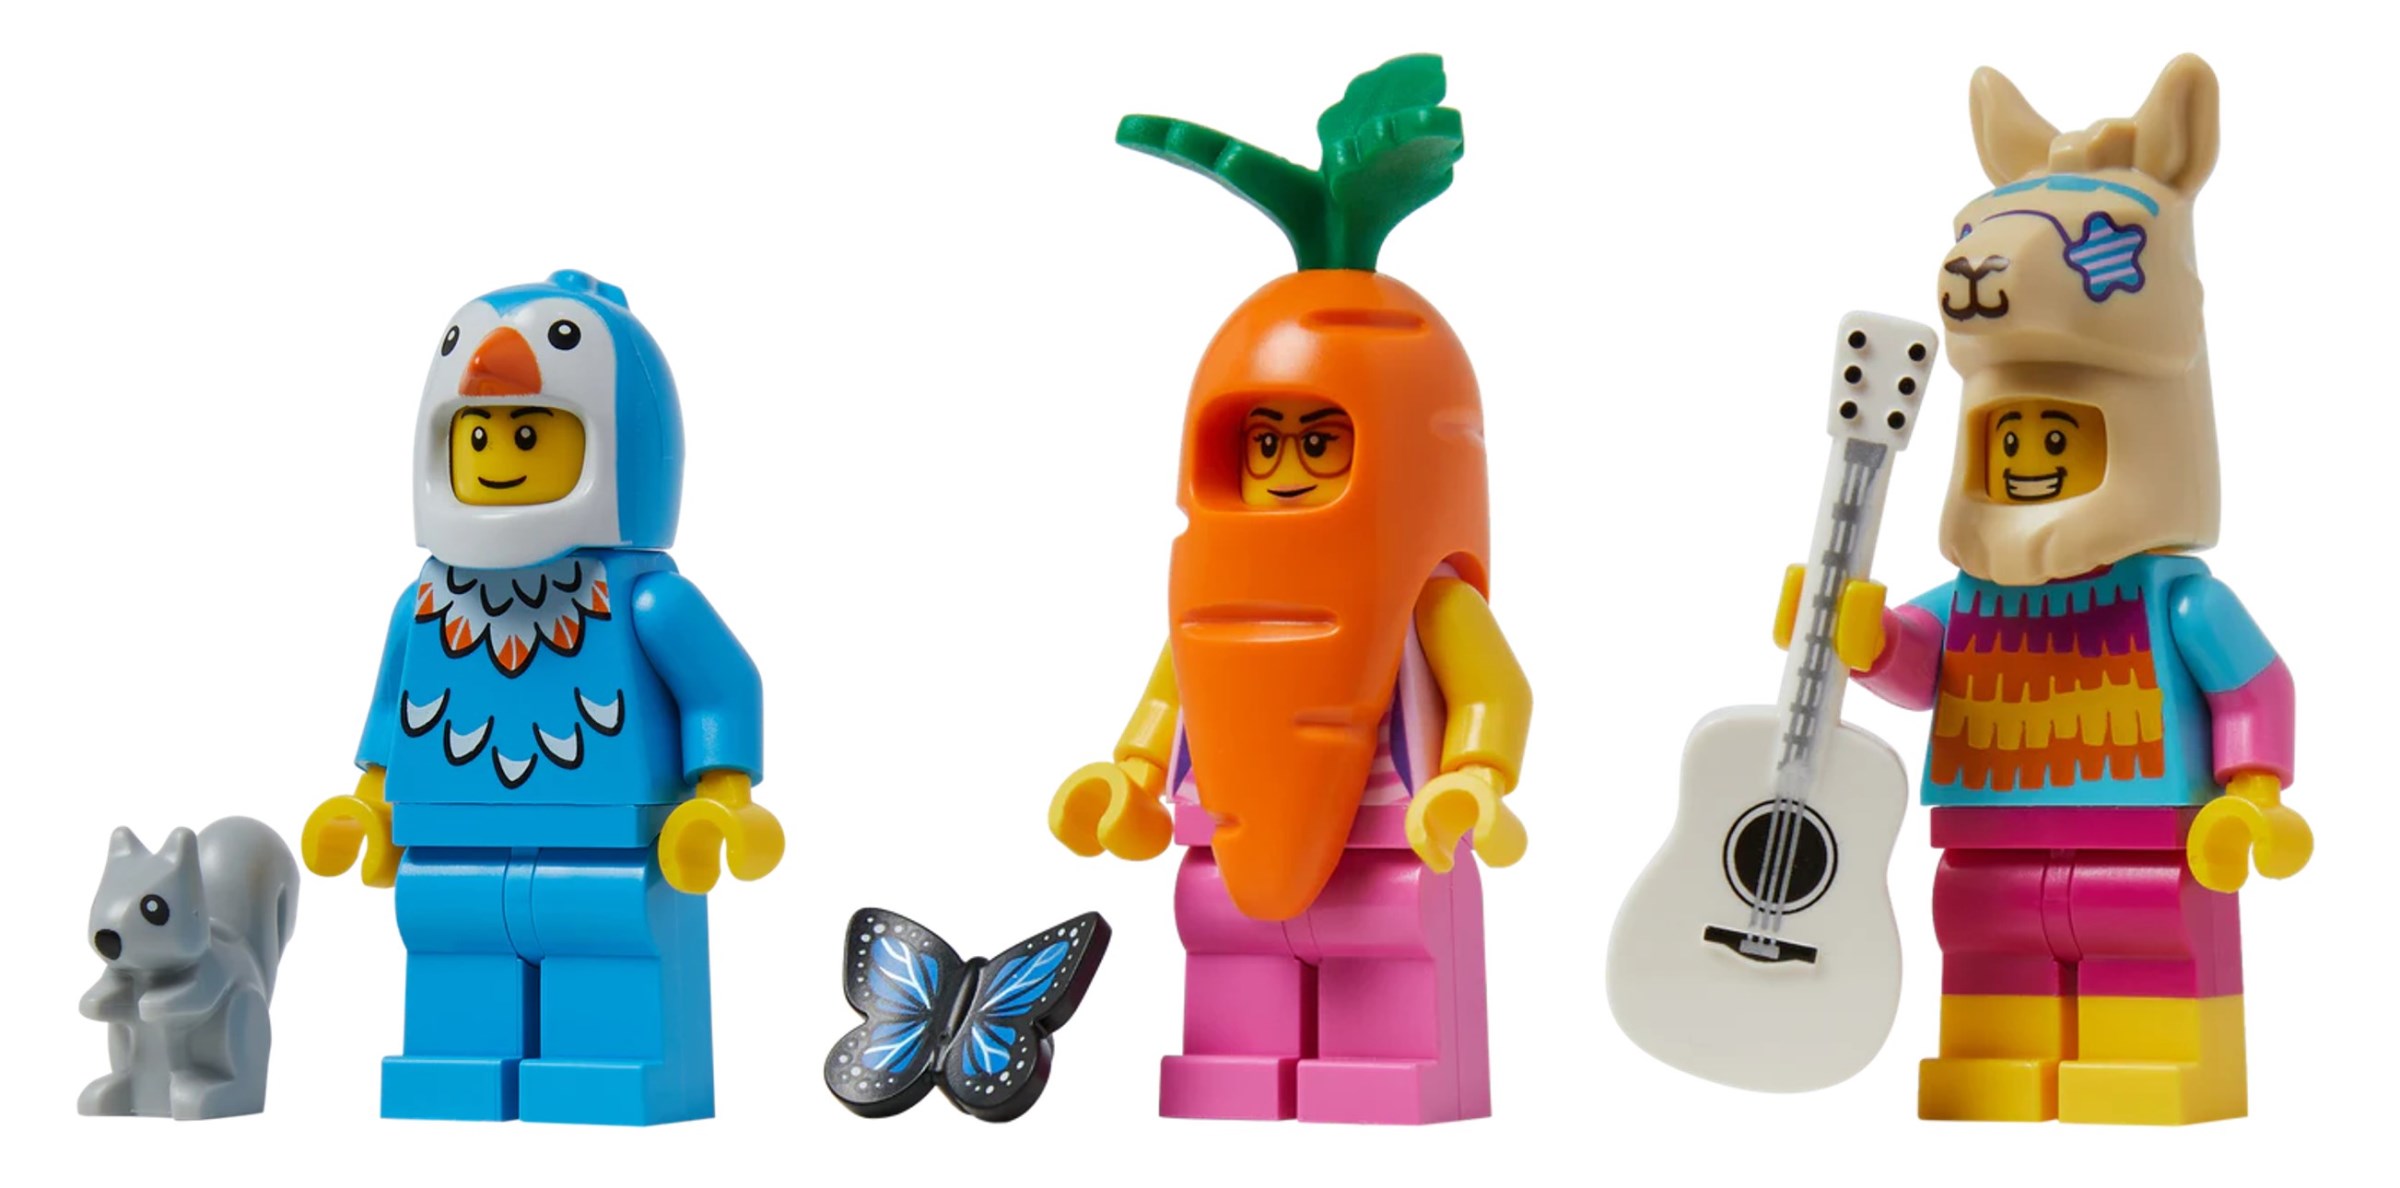 LEGO® Roses – AG LEGO® Certified Stores